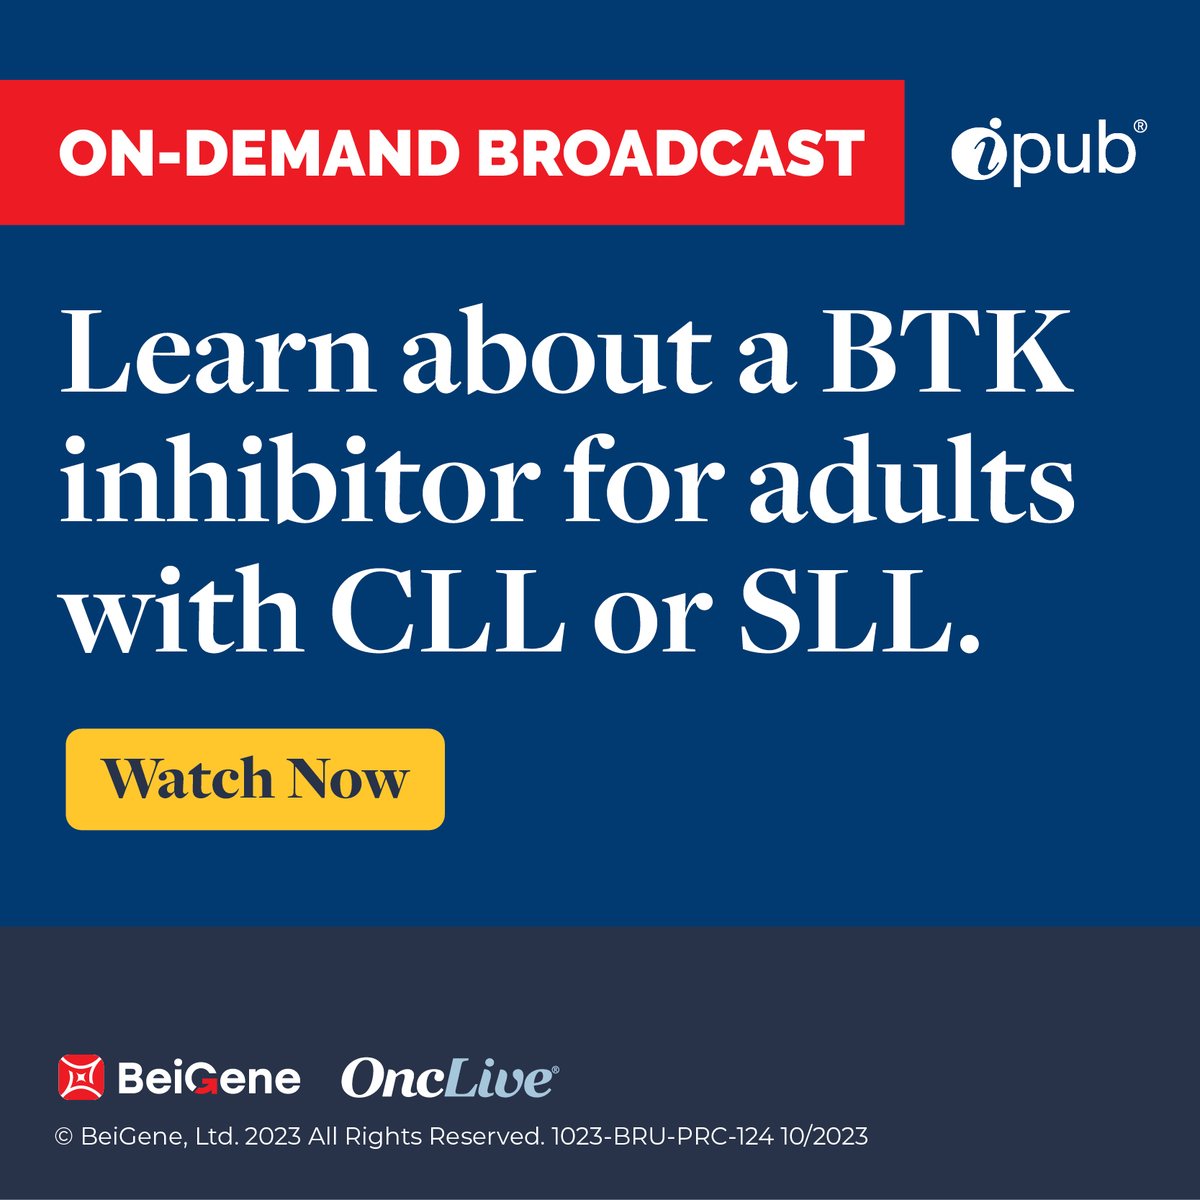 ON-DEMAND BROADCAST: Drs. Danilov and Eradat explore data on a novel second-generation BTK inhibitor for adult patients with CLL or SLL. bit.ly/3NftKaE